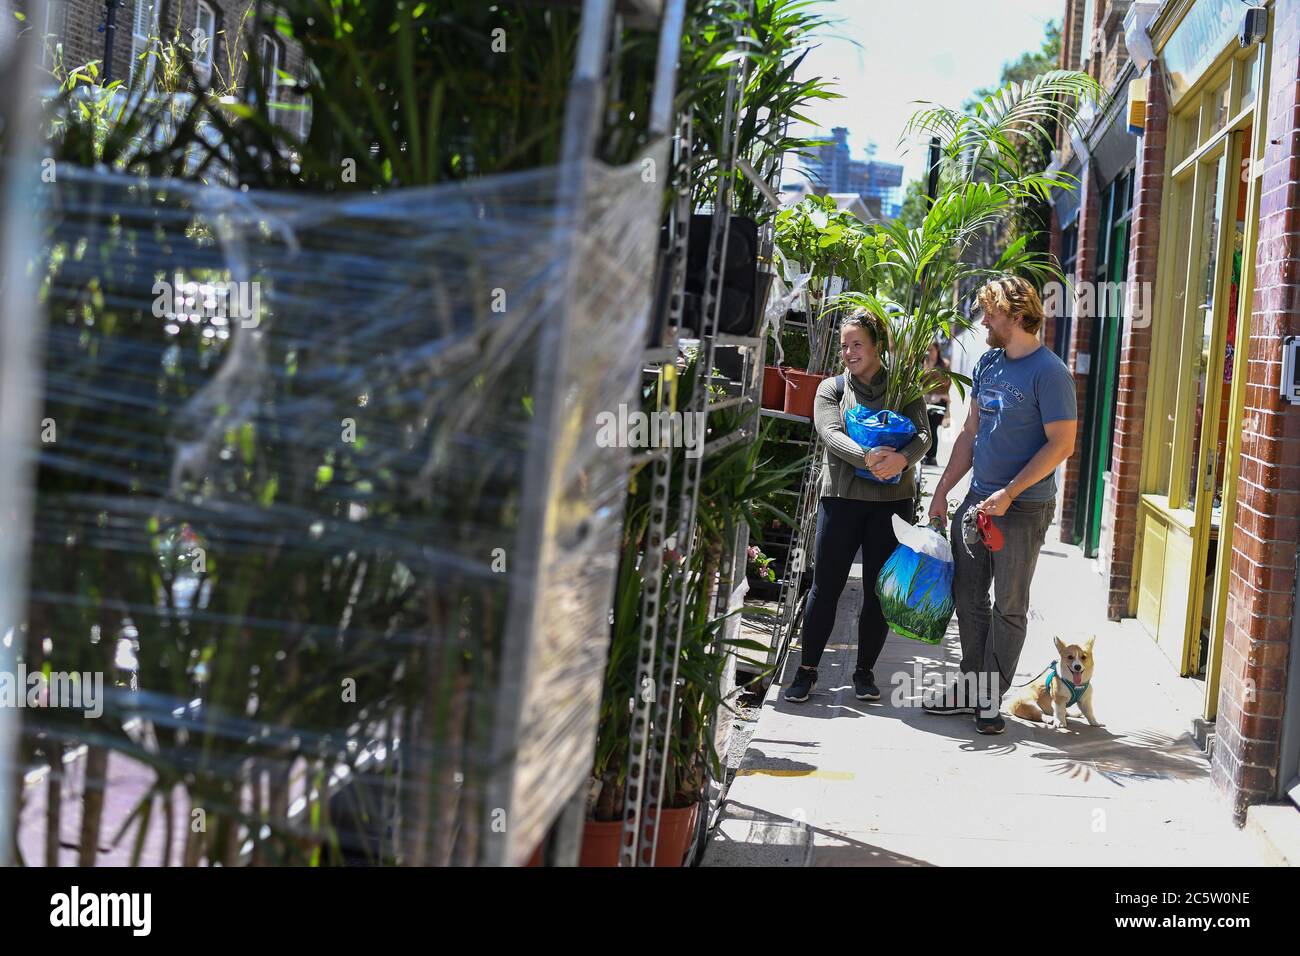 People visit Columbia Road Flower Market, London, as it reopens following the easing of coronavirus lockdown restrictions across England. Stock Photo